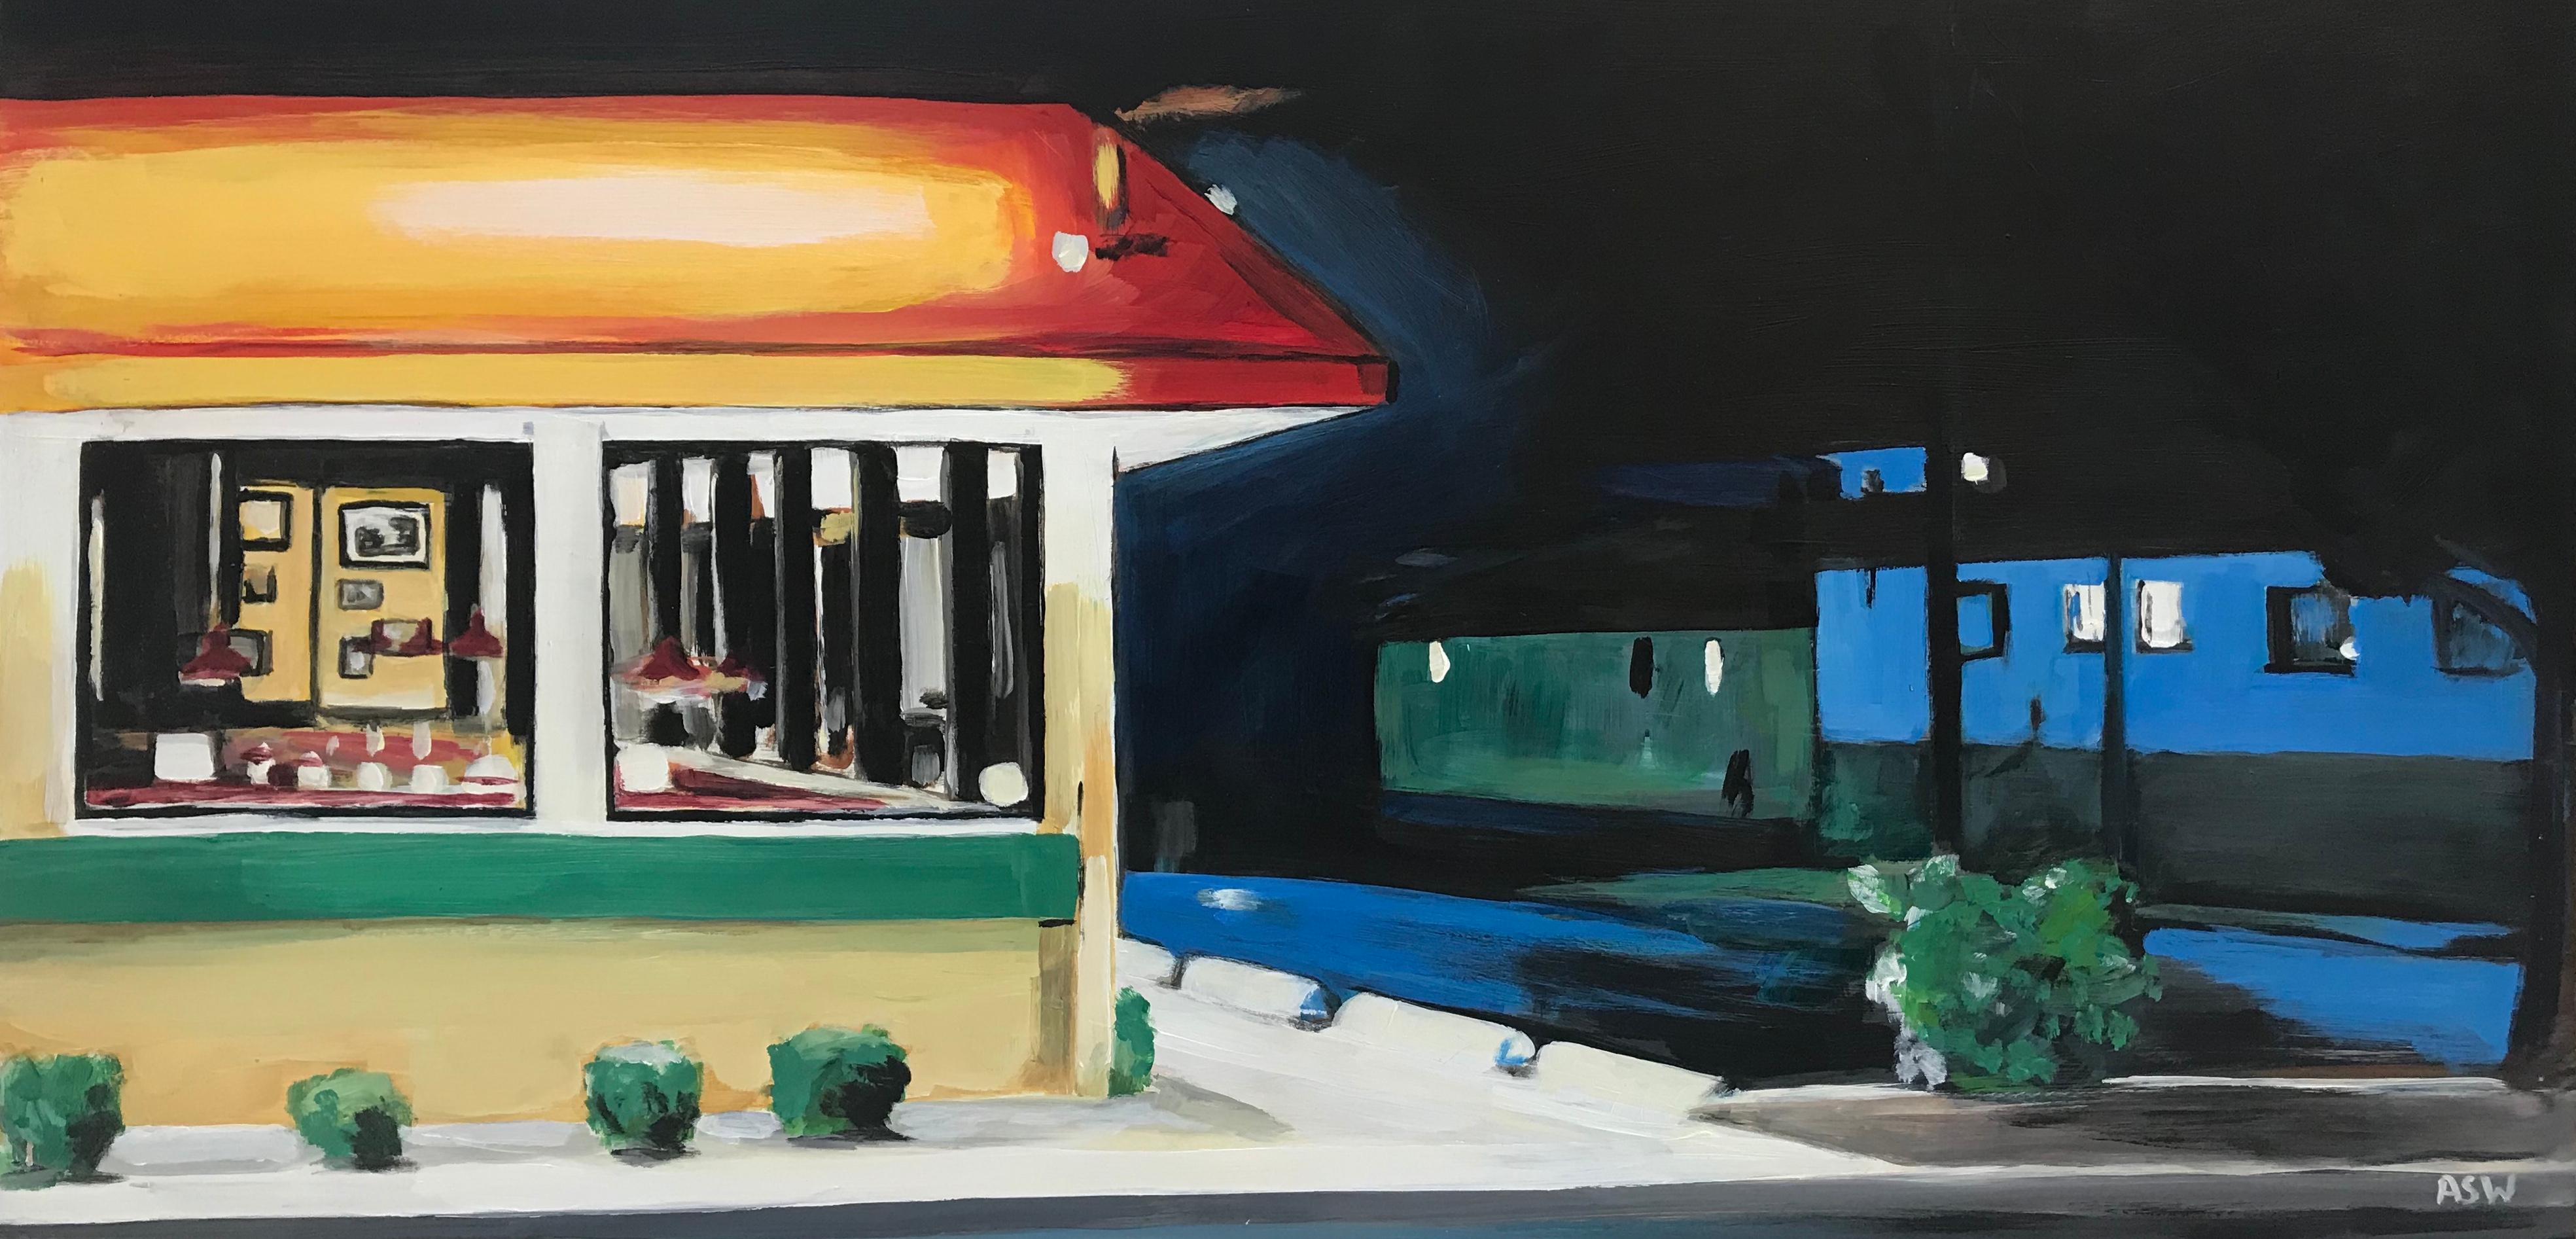 Edward Hopper American Diner Painting by Leading British Urban Landscape Artist, Angela Wakefield. Paintings of American Diners, Food Courts, Truck Stops, Gas Stations, Still Life and all aspects of “Americana”.

Art measures 24 x 12 inches
Frame